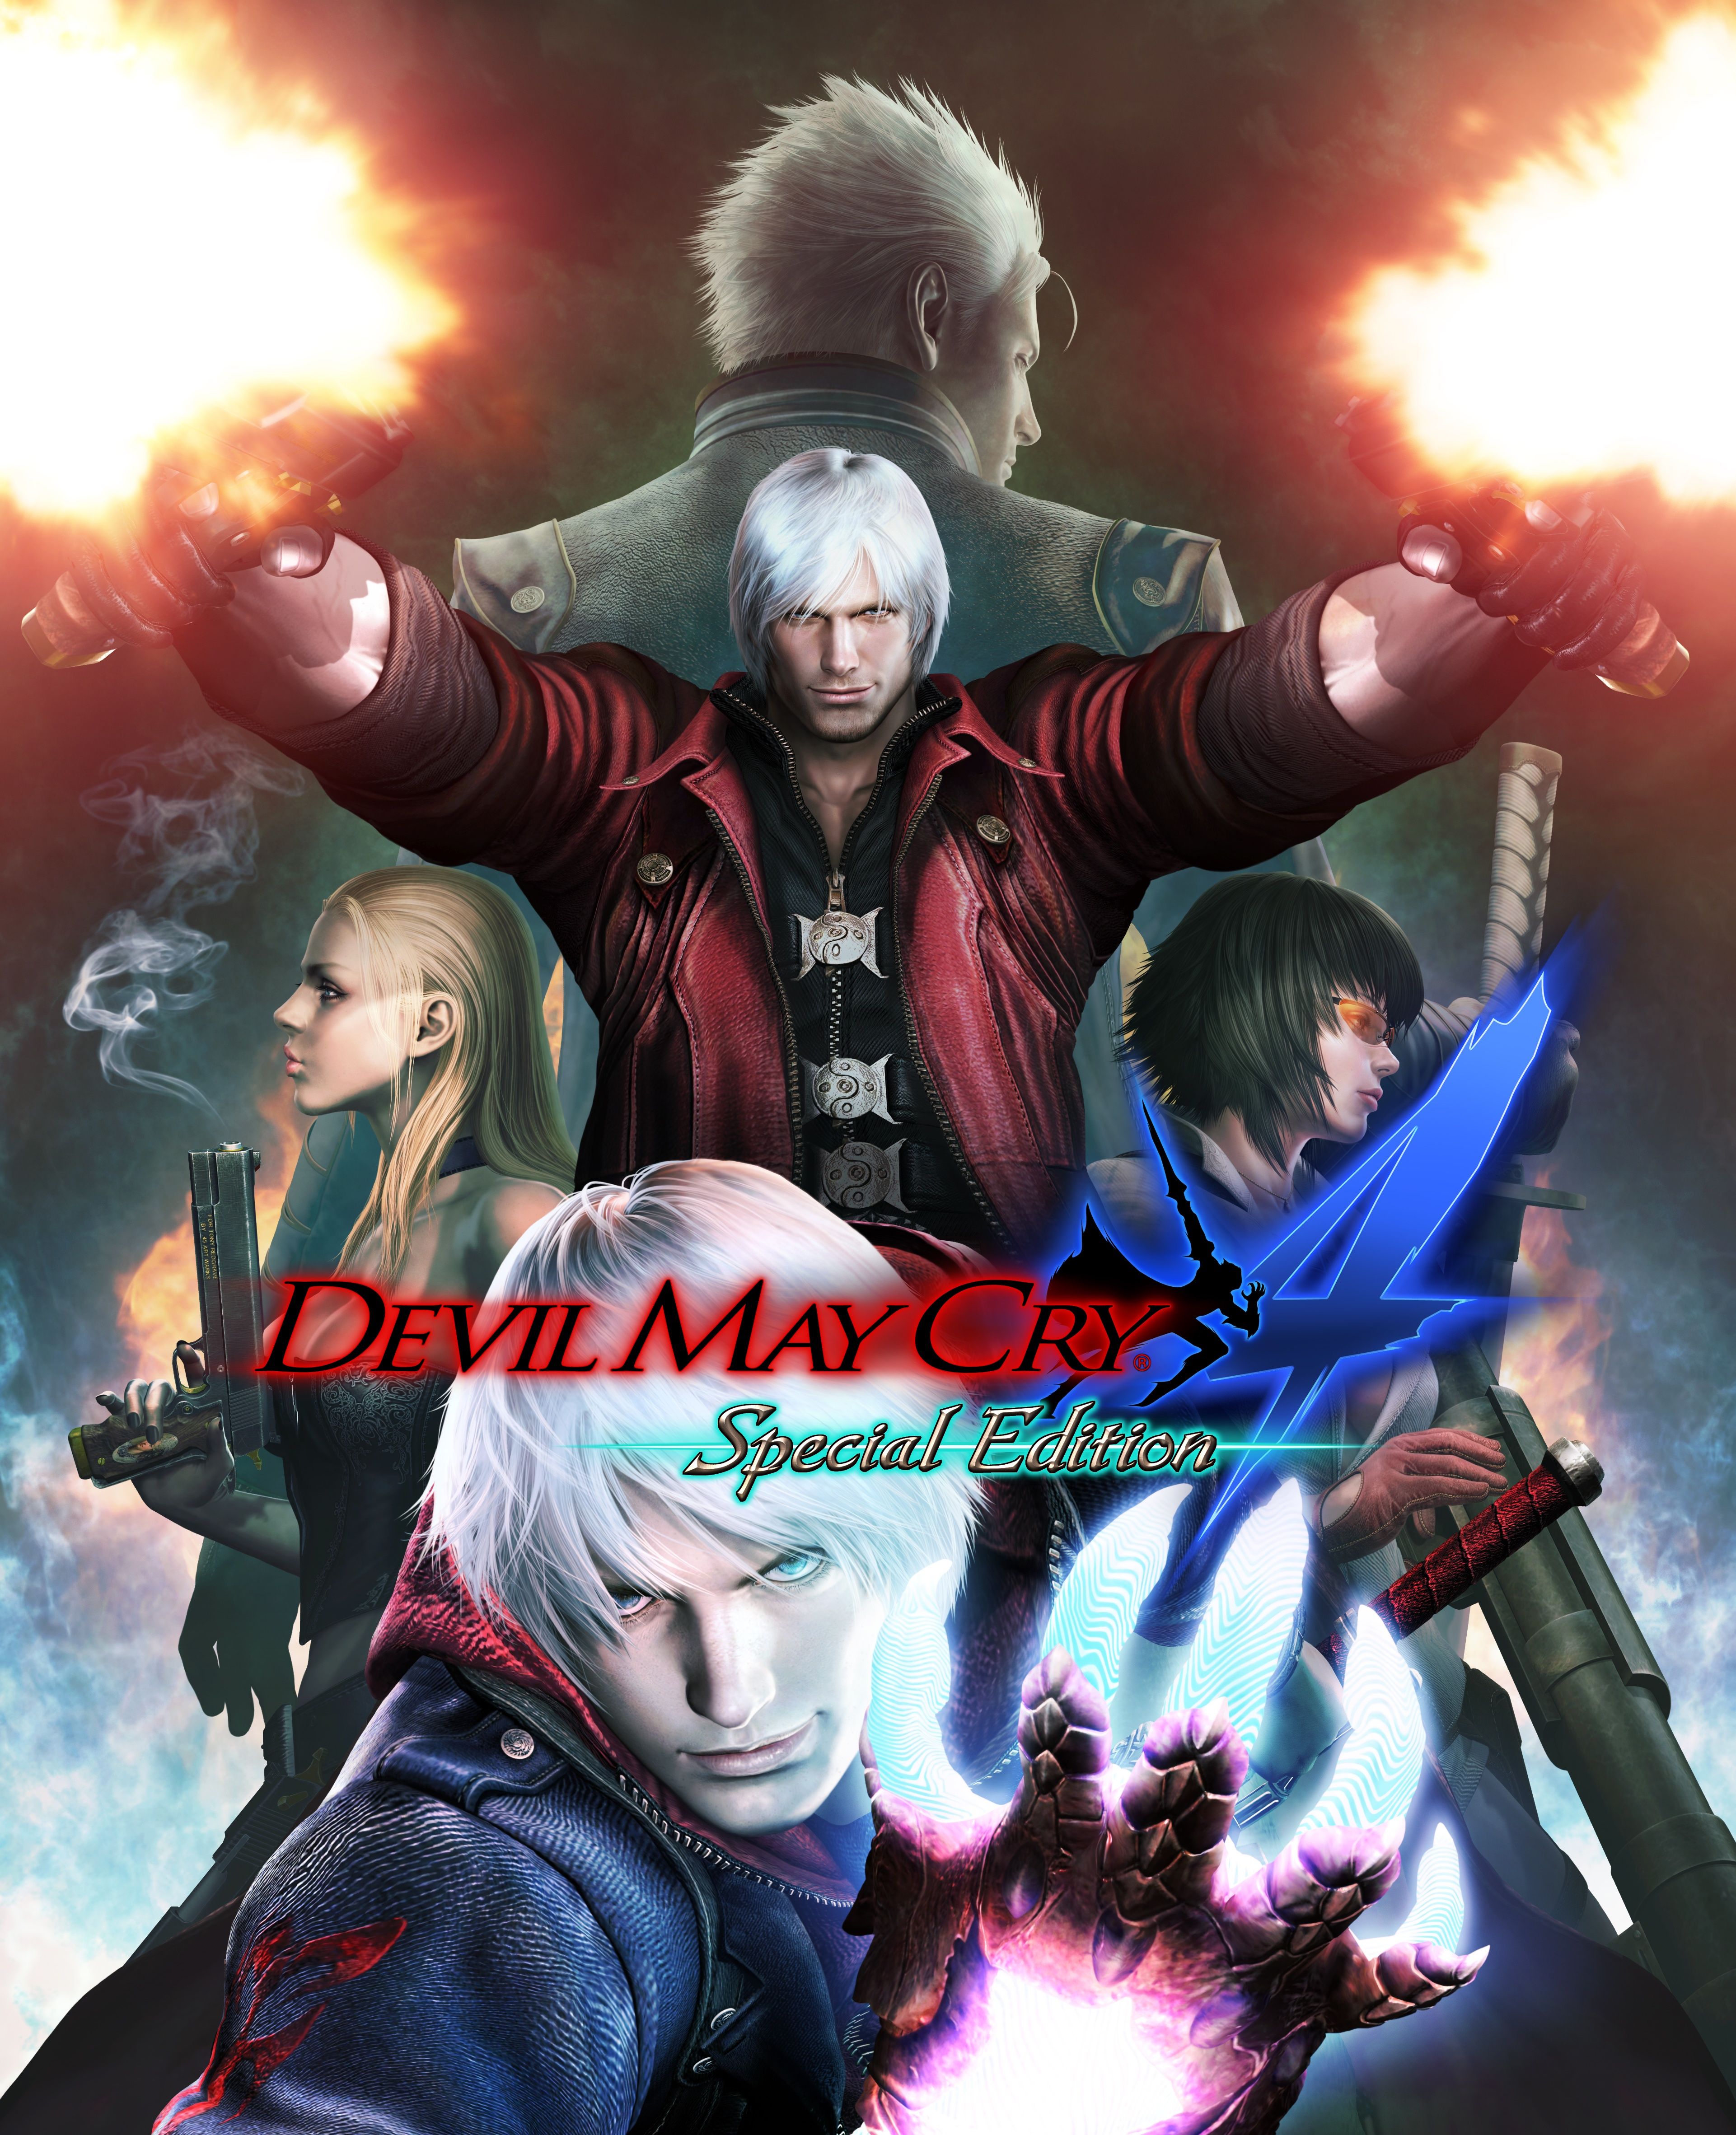 Devil May Cry 4. Devil May Cry